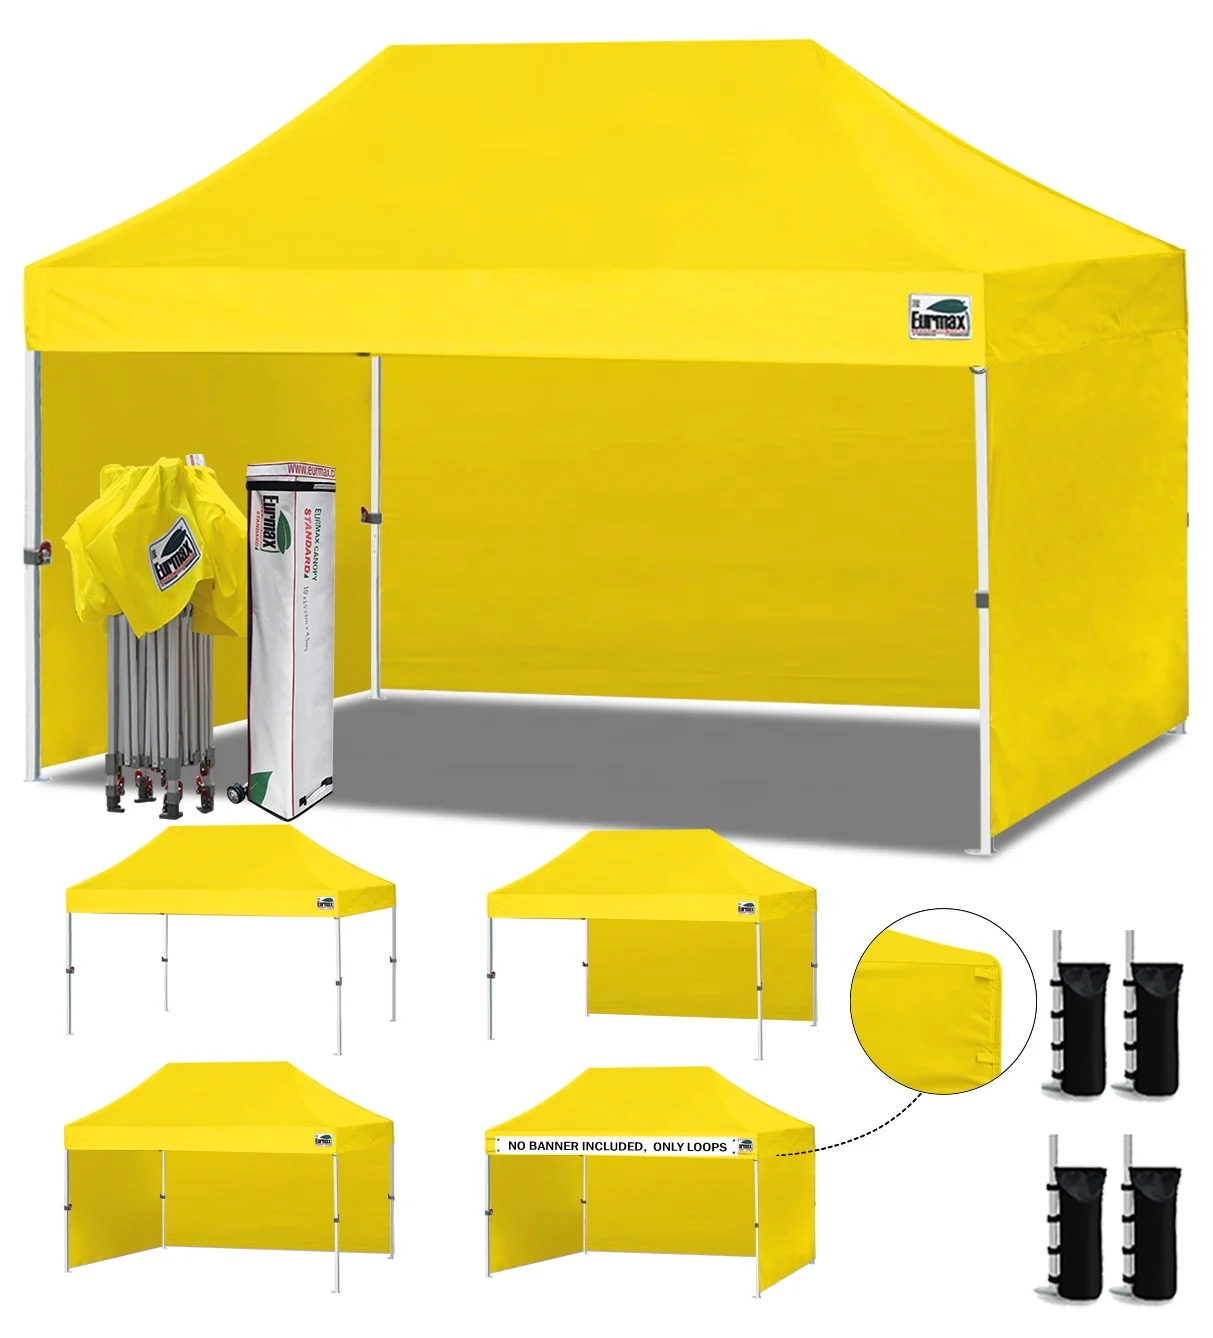 

Eurmax 10x15ft Pop up Canopy with 4 Sidewalls Outdoor Sunshade Tent Event Trade Show Canopy Yellow